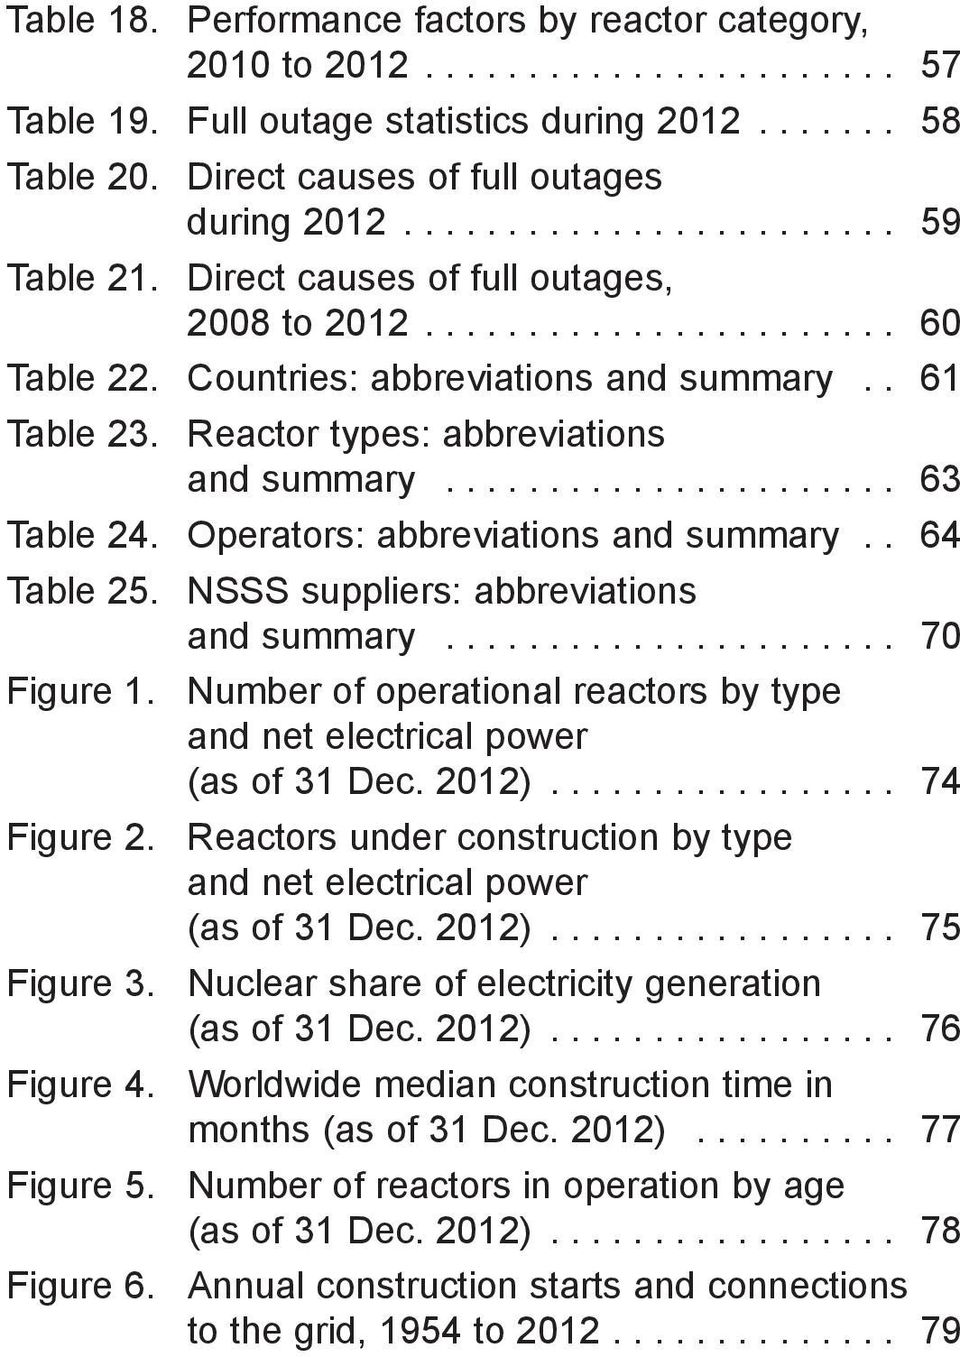 Operators: abbreviations and summary.. 64 Table 25. NSSS suppliers: abbreviations and summary... 70 Figure 1. Number of operational reactors by type and net electrical power (as of 31 Dec. 2012).